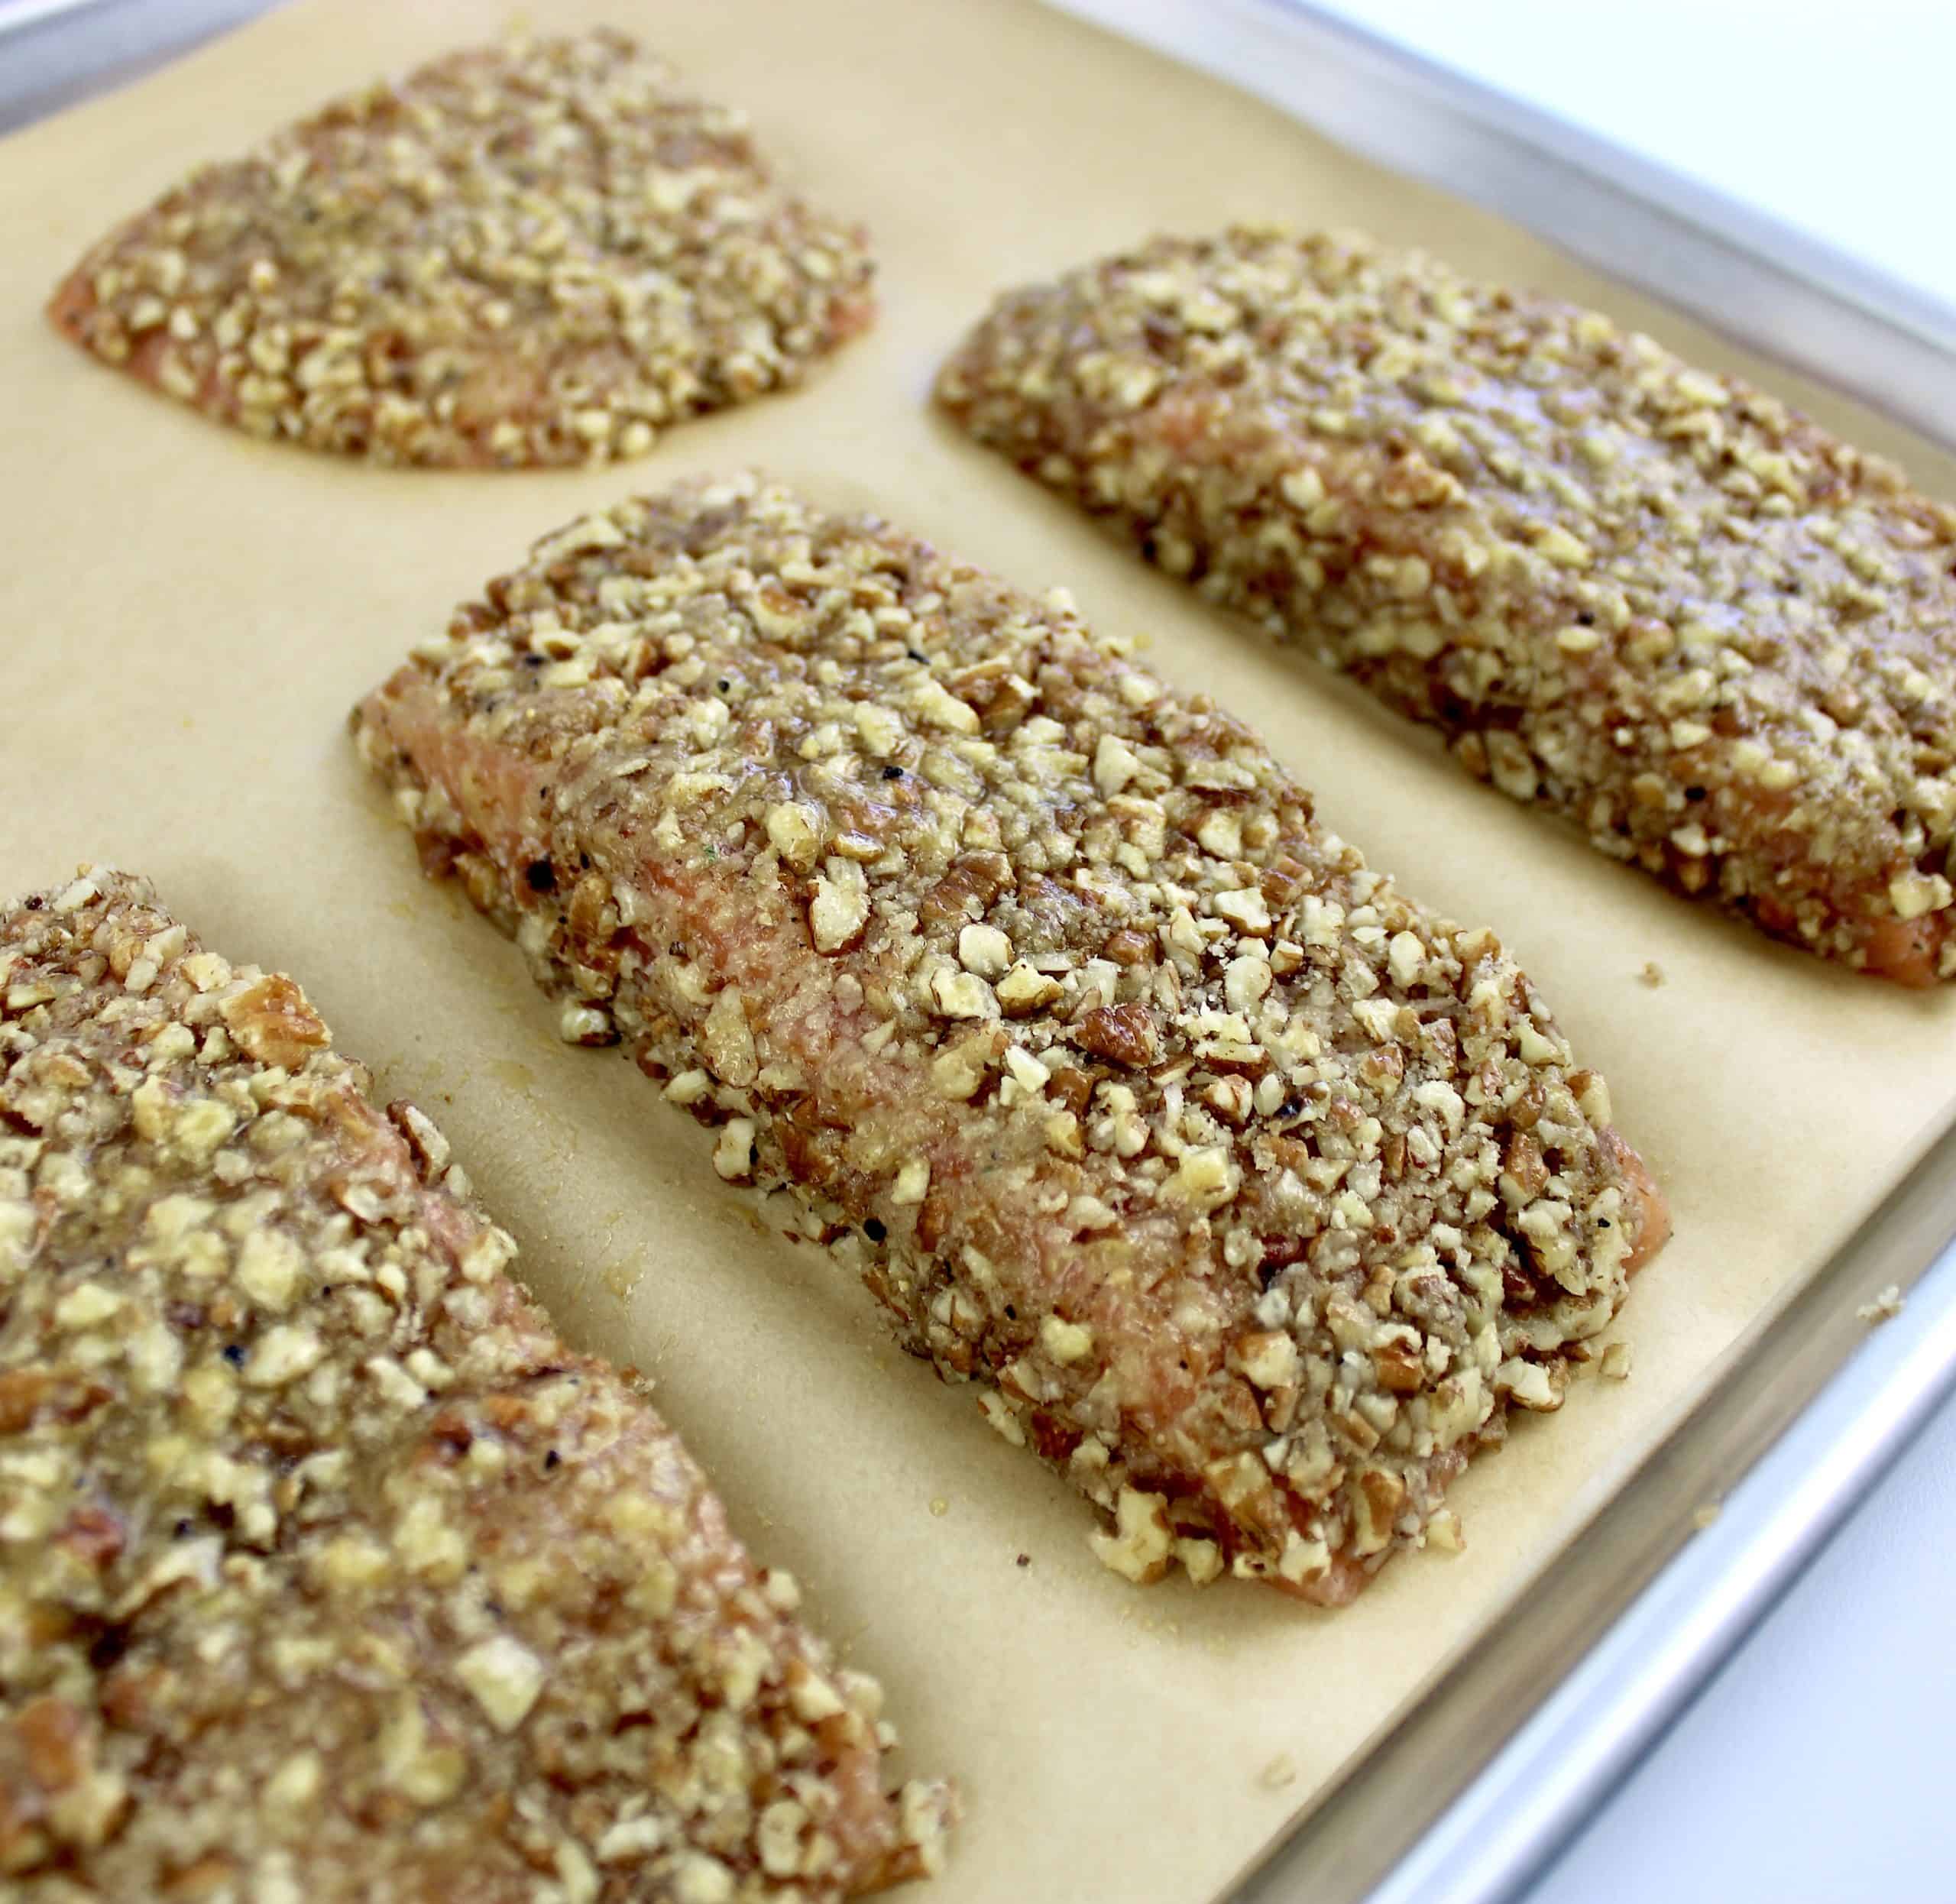 Pecan Crusted Salmon unbaked on parchment lined baking sheet